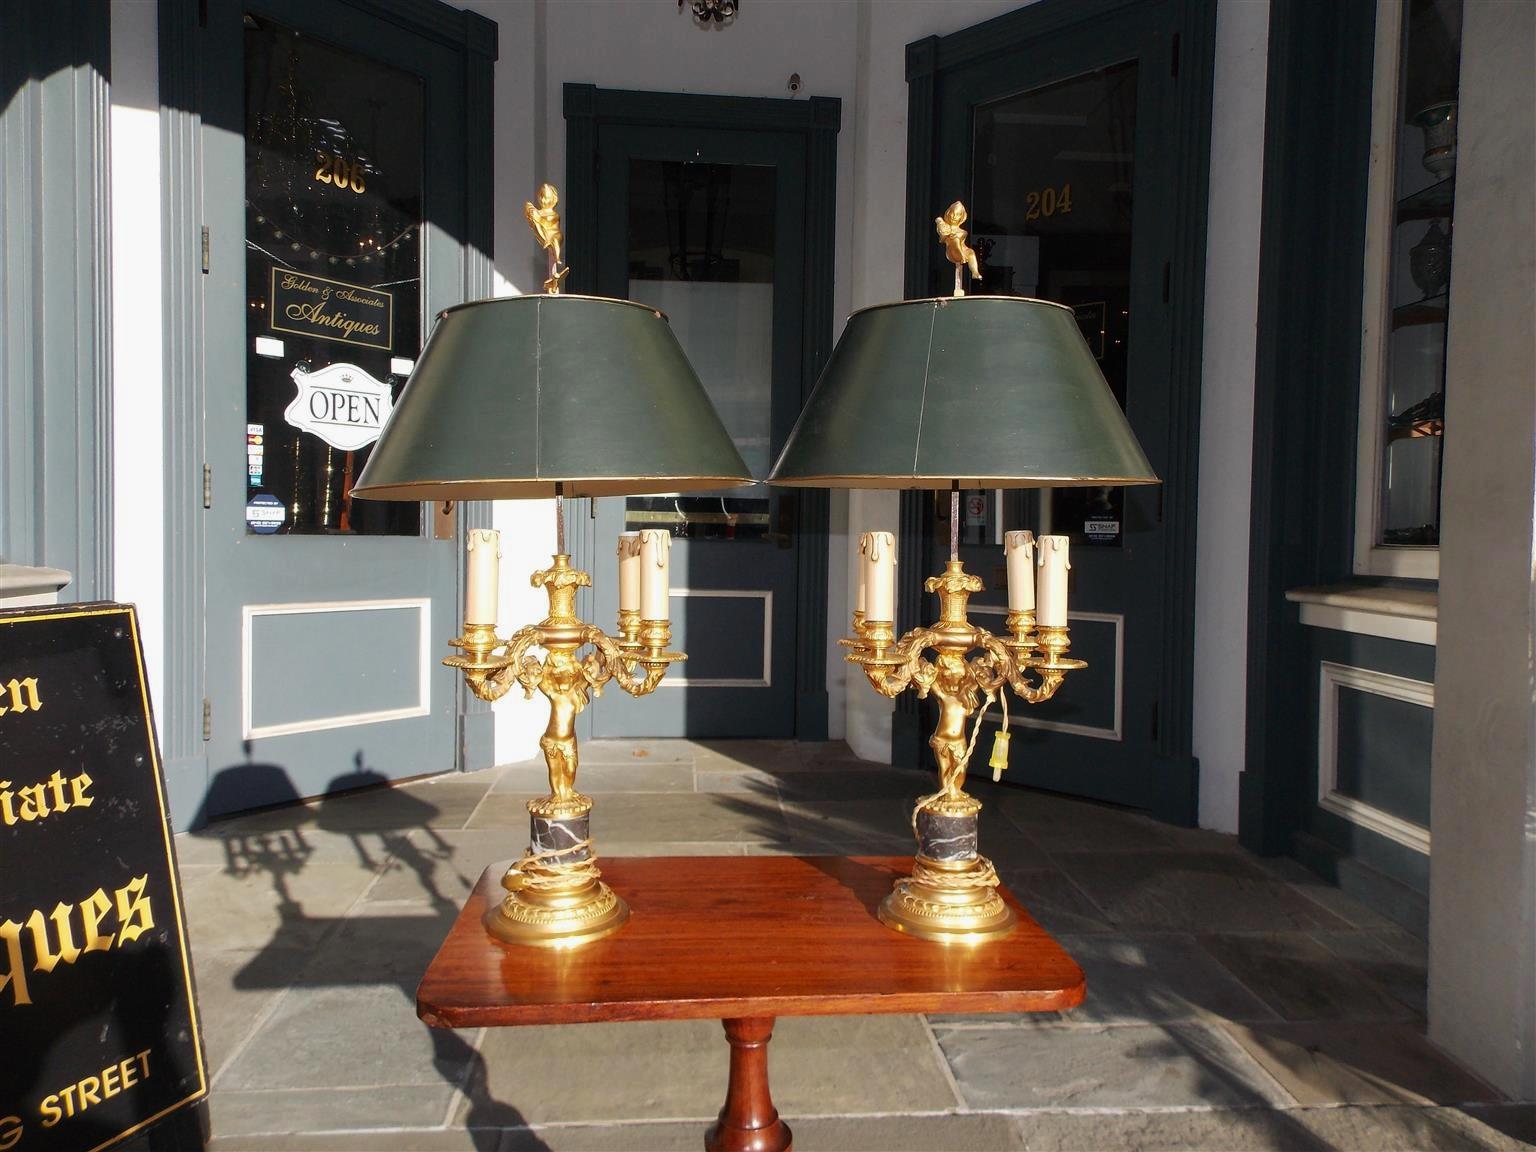 Pair of French gilt bronze figural Bouillotte lamps with hand painted adjustable tin shades, decorative locking arrows, four-light interior clusters, and resting on circular gilt bronze beaded marble bases, Mid-19th century. Lamps were originally